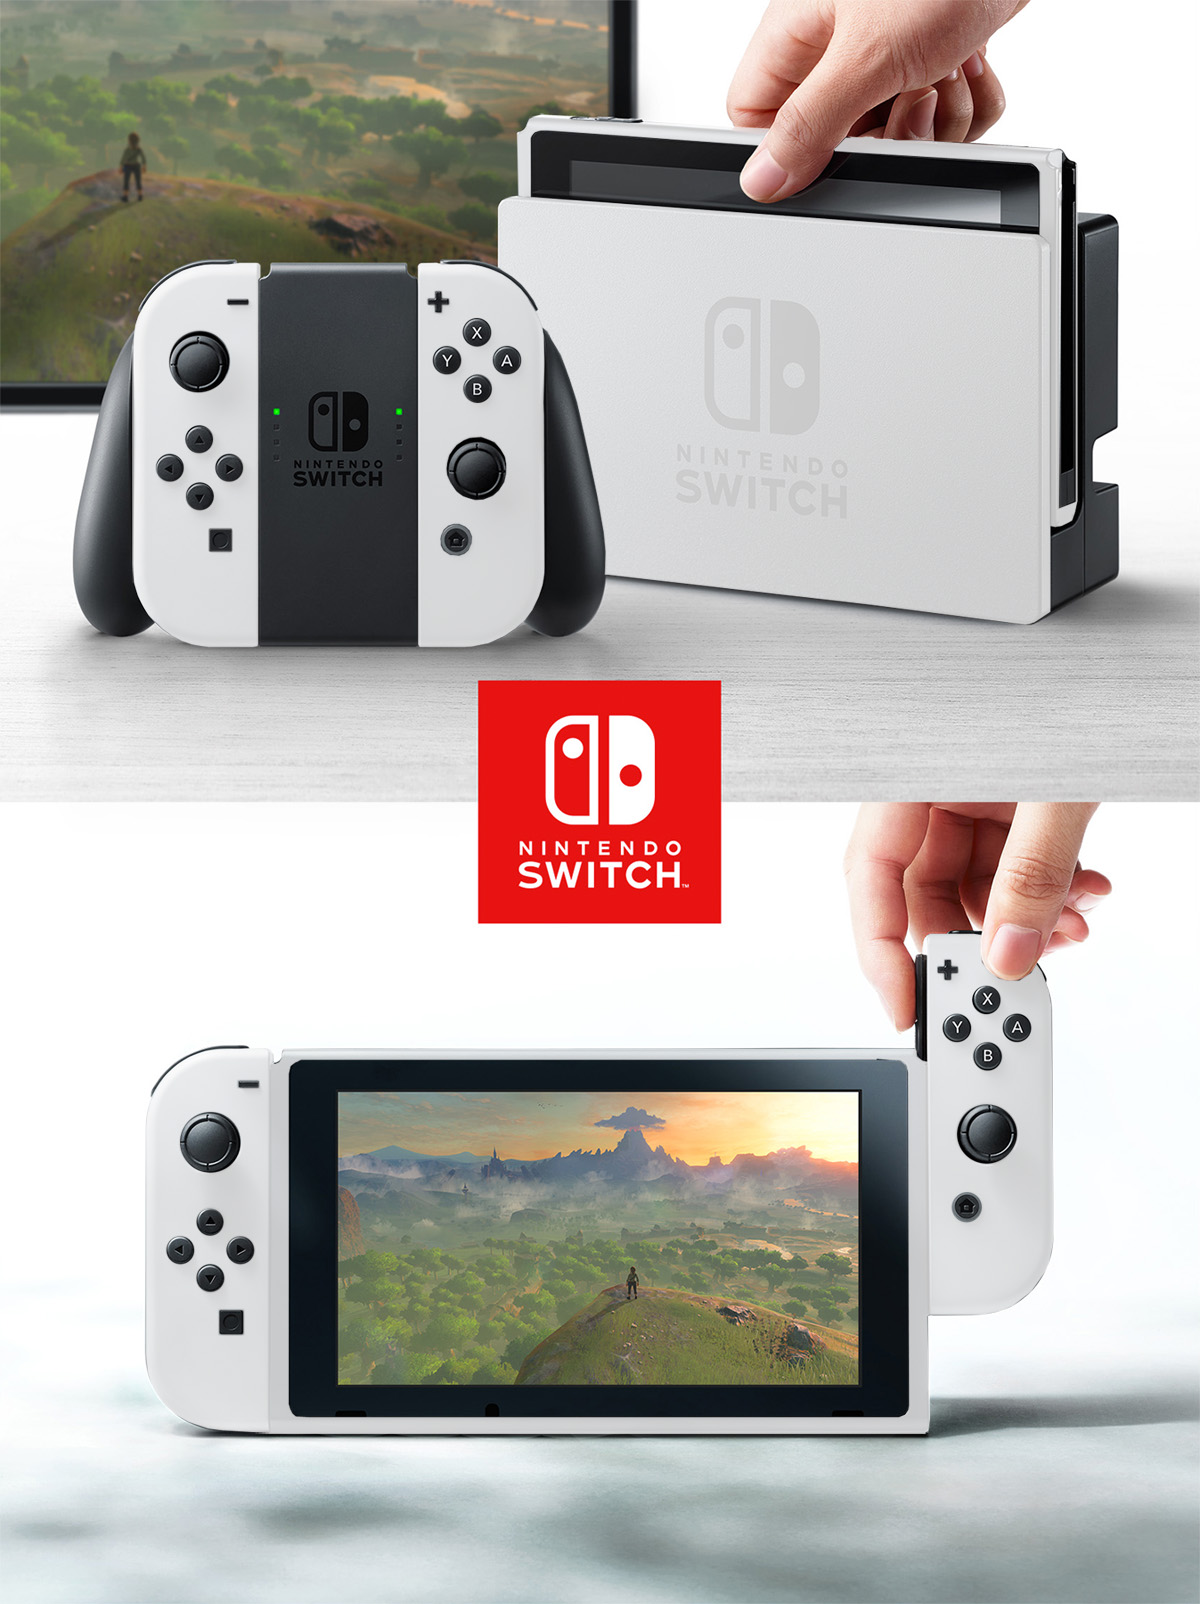 Look how easy it would be for Nintendo to make the Switch so much